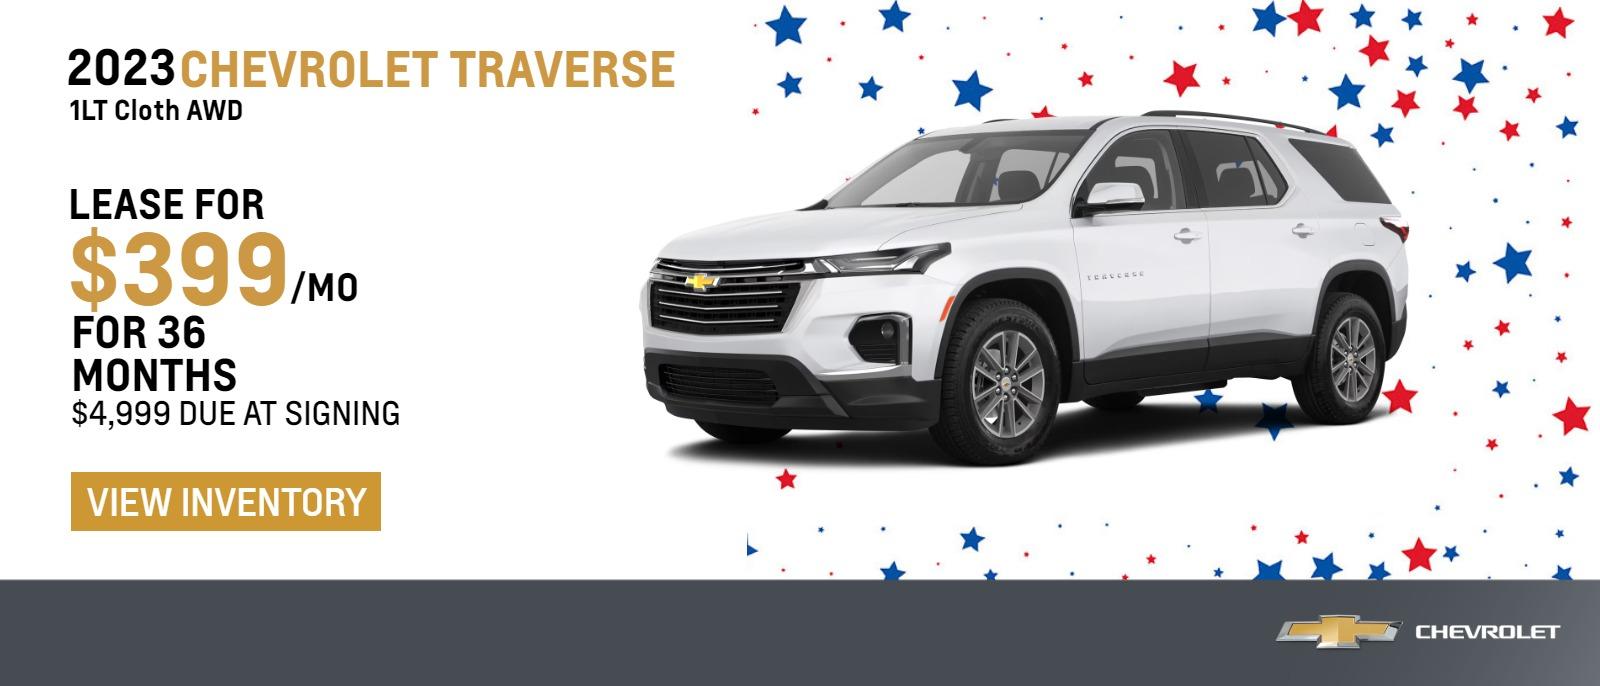 2023 Chevrolet Traverse 1LT Cloth AWD
$399 Month Lease | 36 Months | $4999 Due at signing